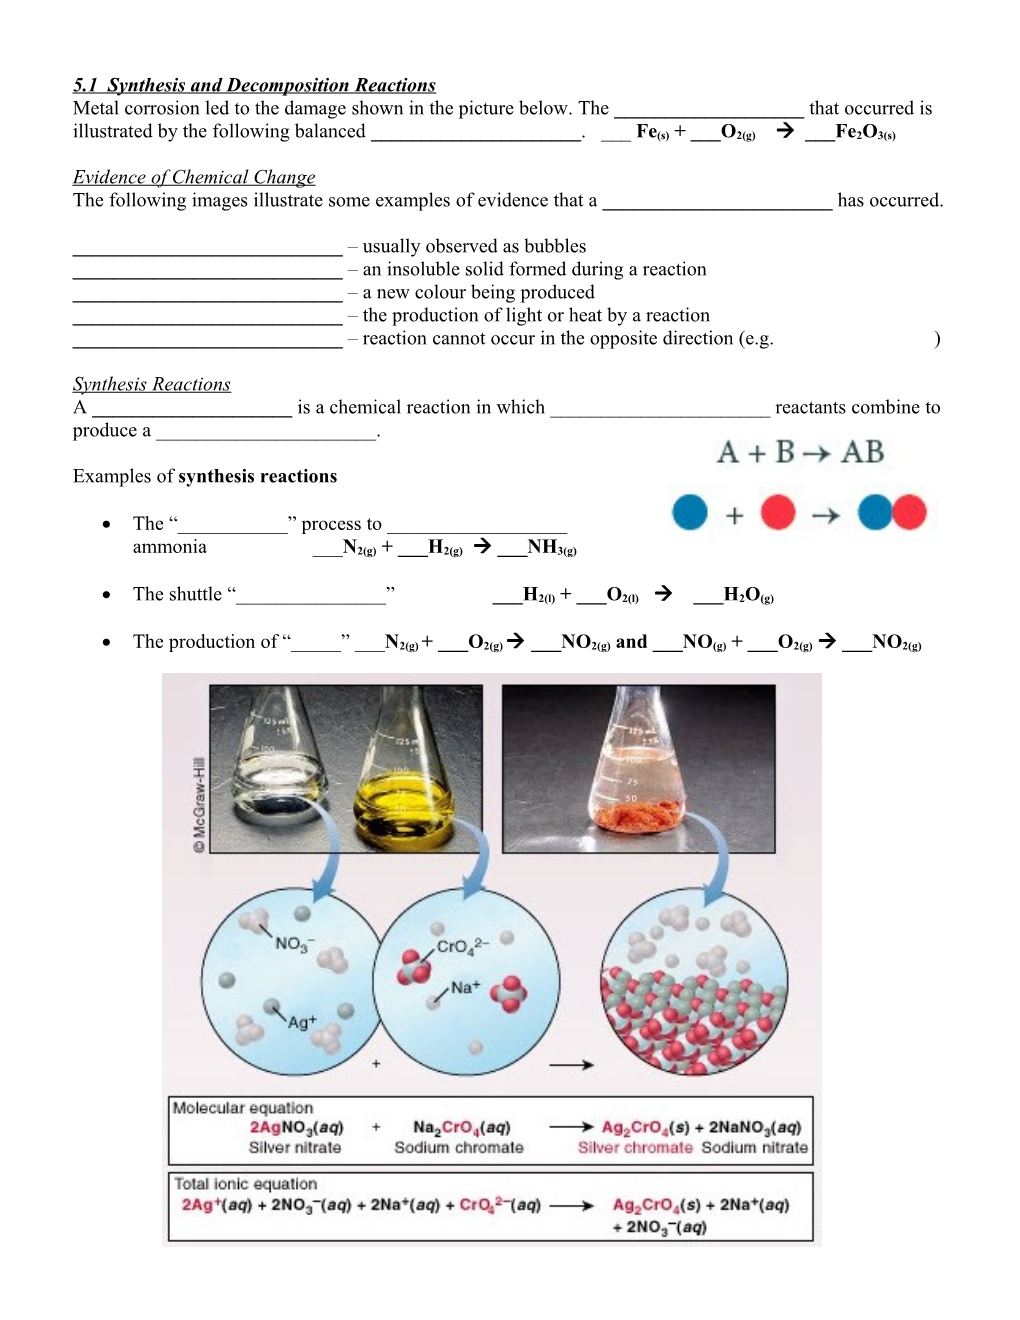 5.1 Synthesis and Decomposition Reactions